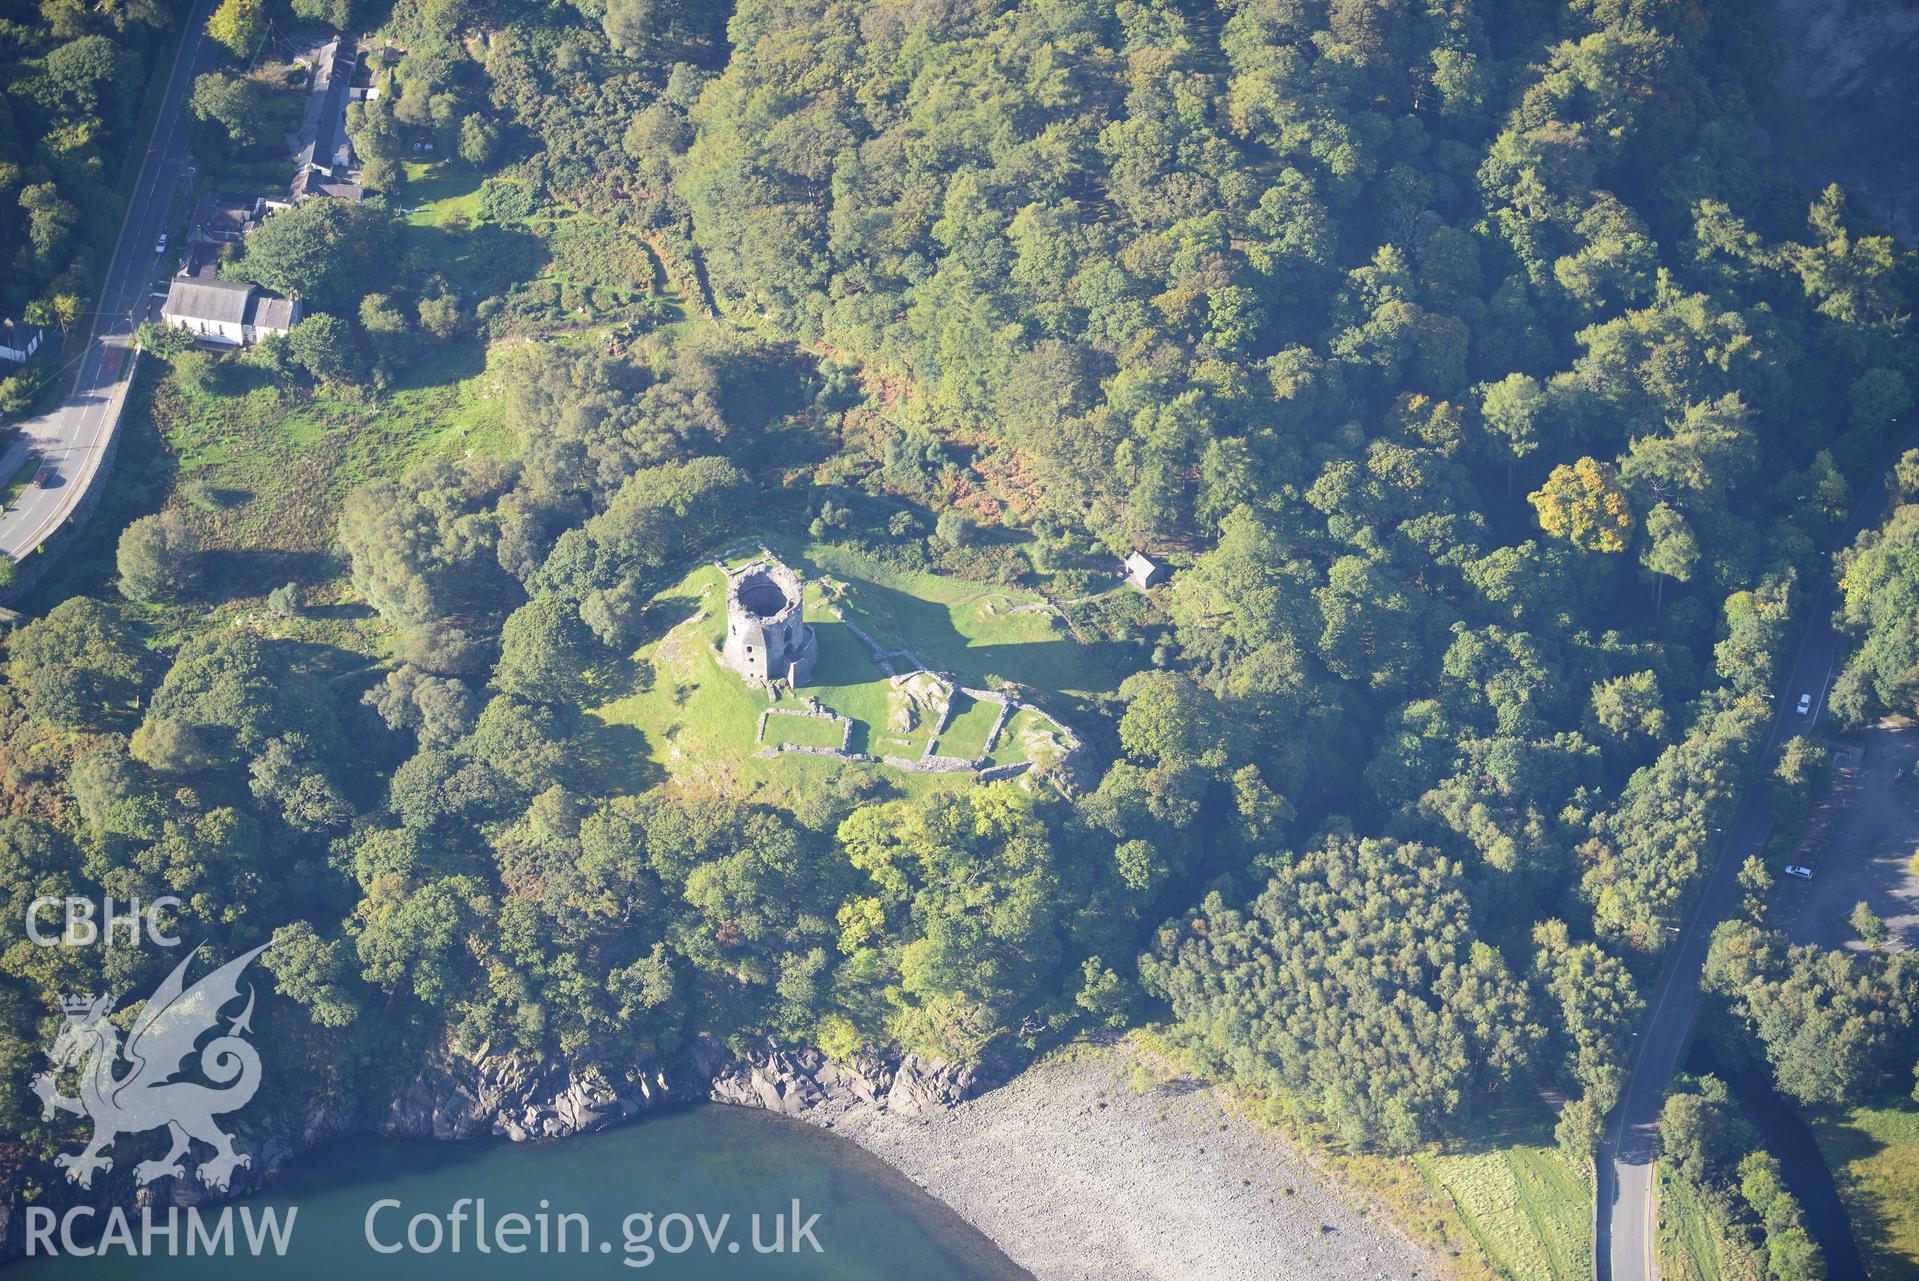 Dolbadarn Castle on the shore of Llyn Peris, Llanberis. Oblique aerial photograph taken during the Royal Commission's programme of archaeological aerial reconnaissance by Toby Driver on 2nd October 2015.